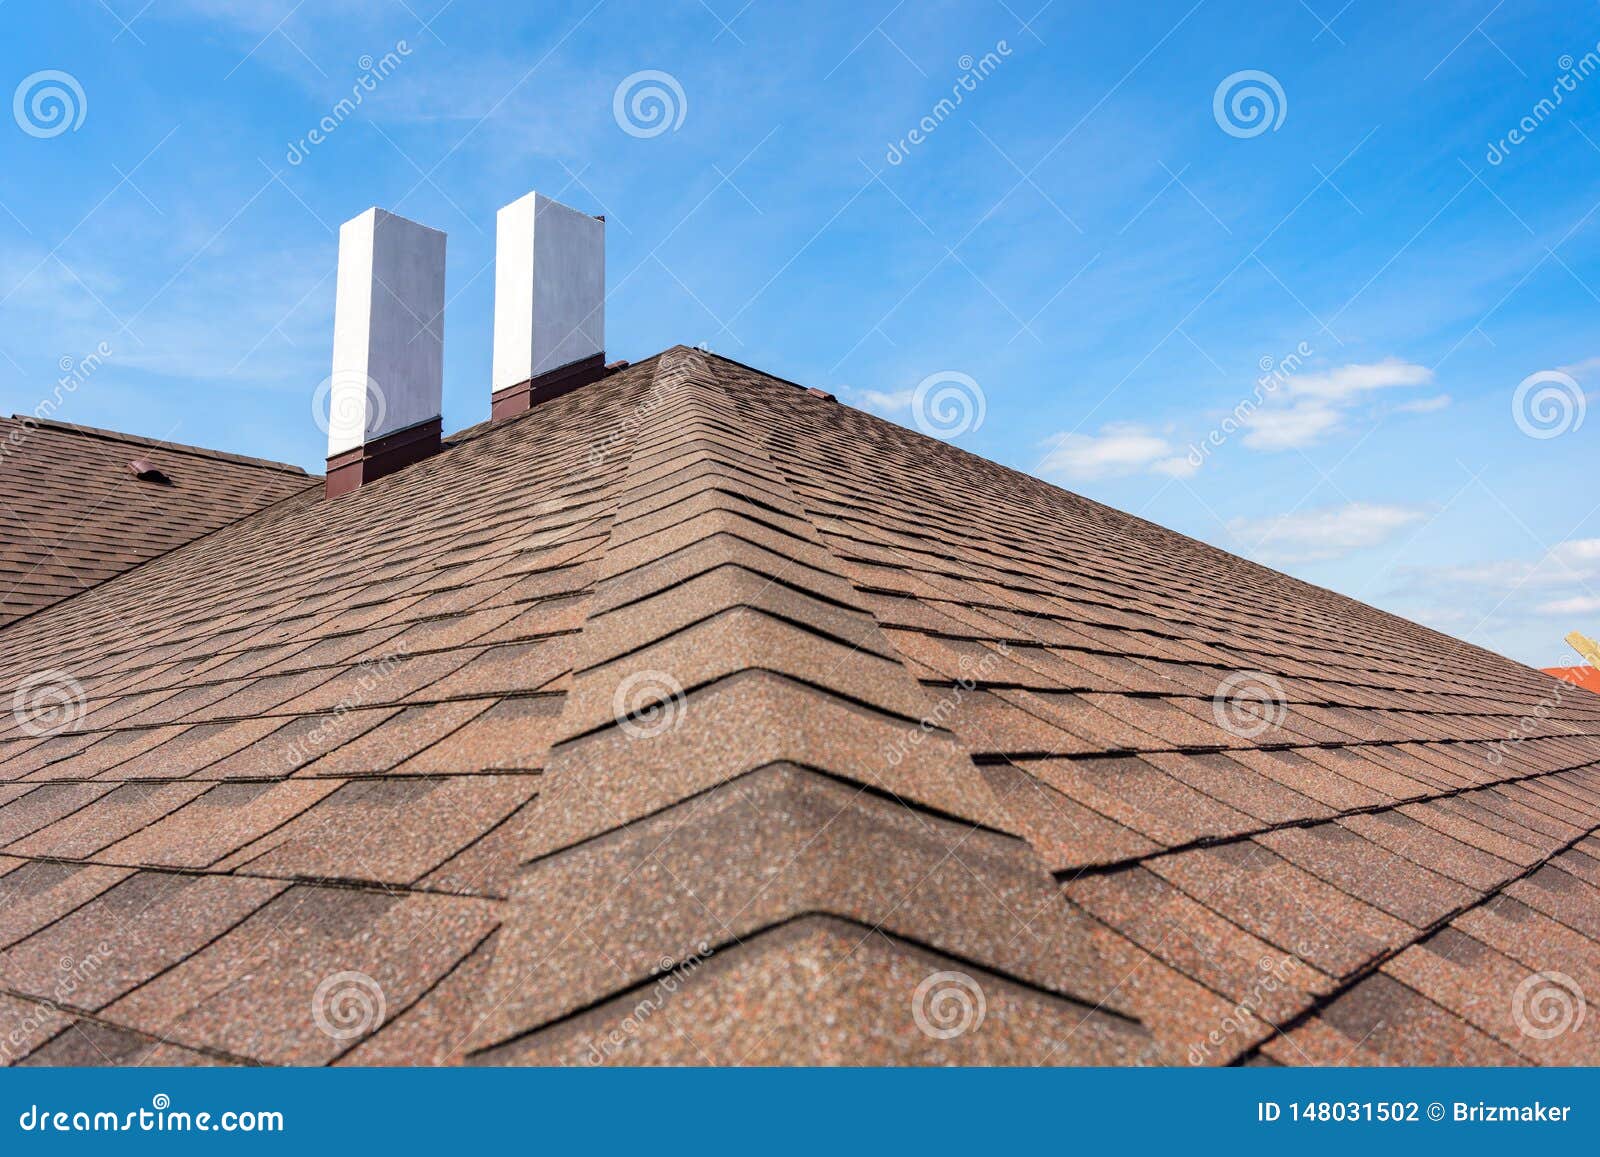 Asphalt Tile Roof with Chimney on New Home Under Construction Stock